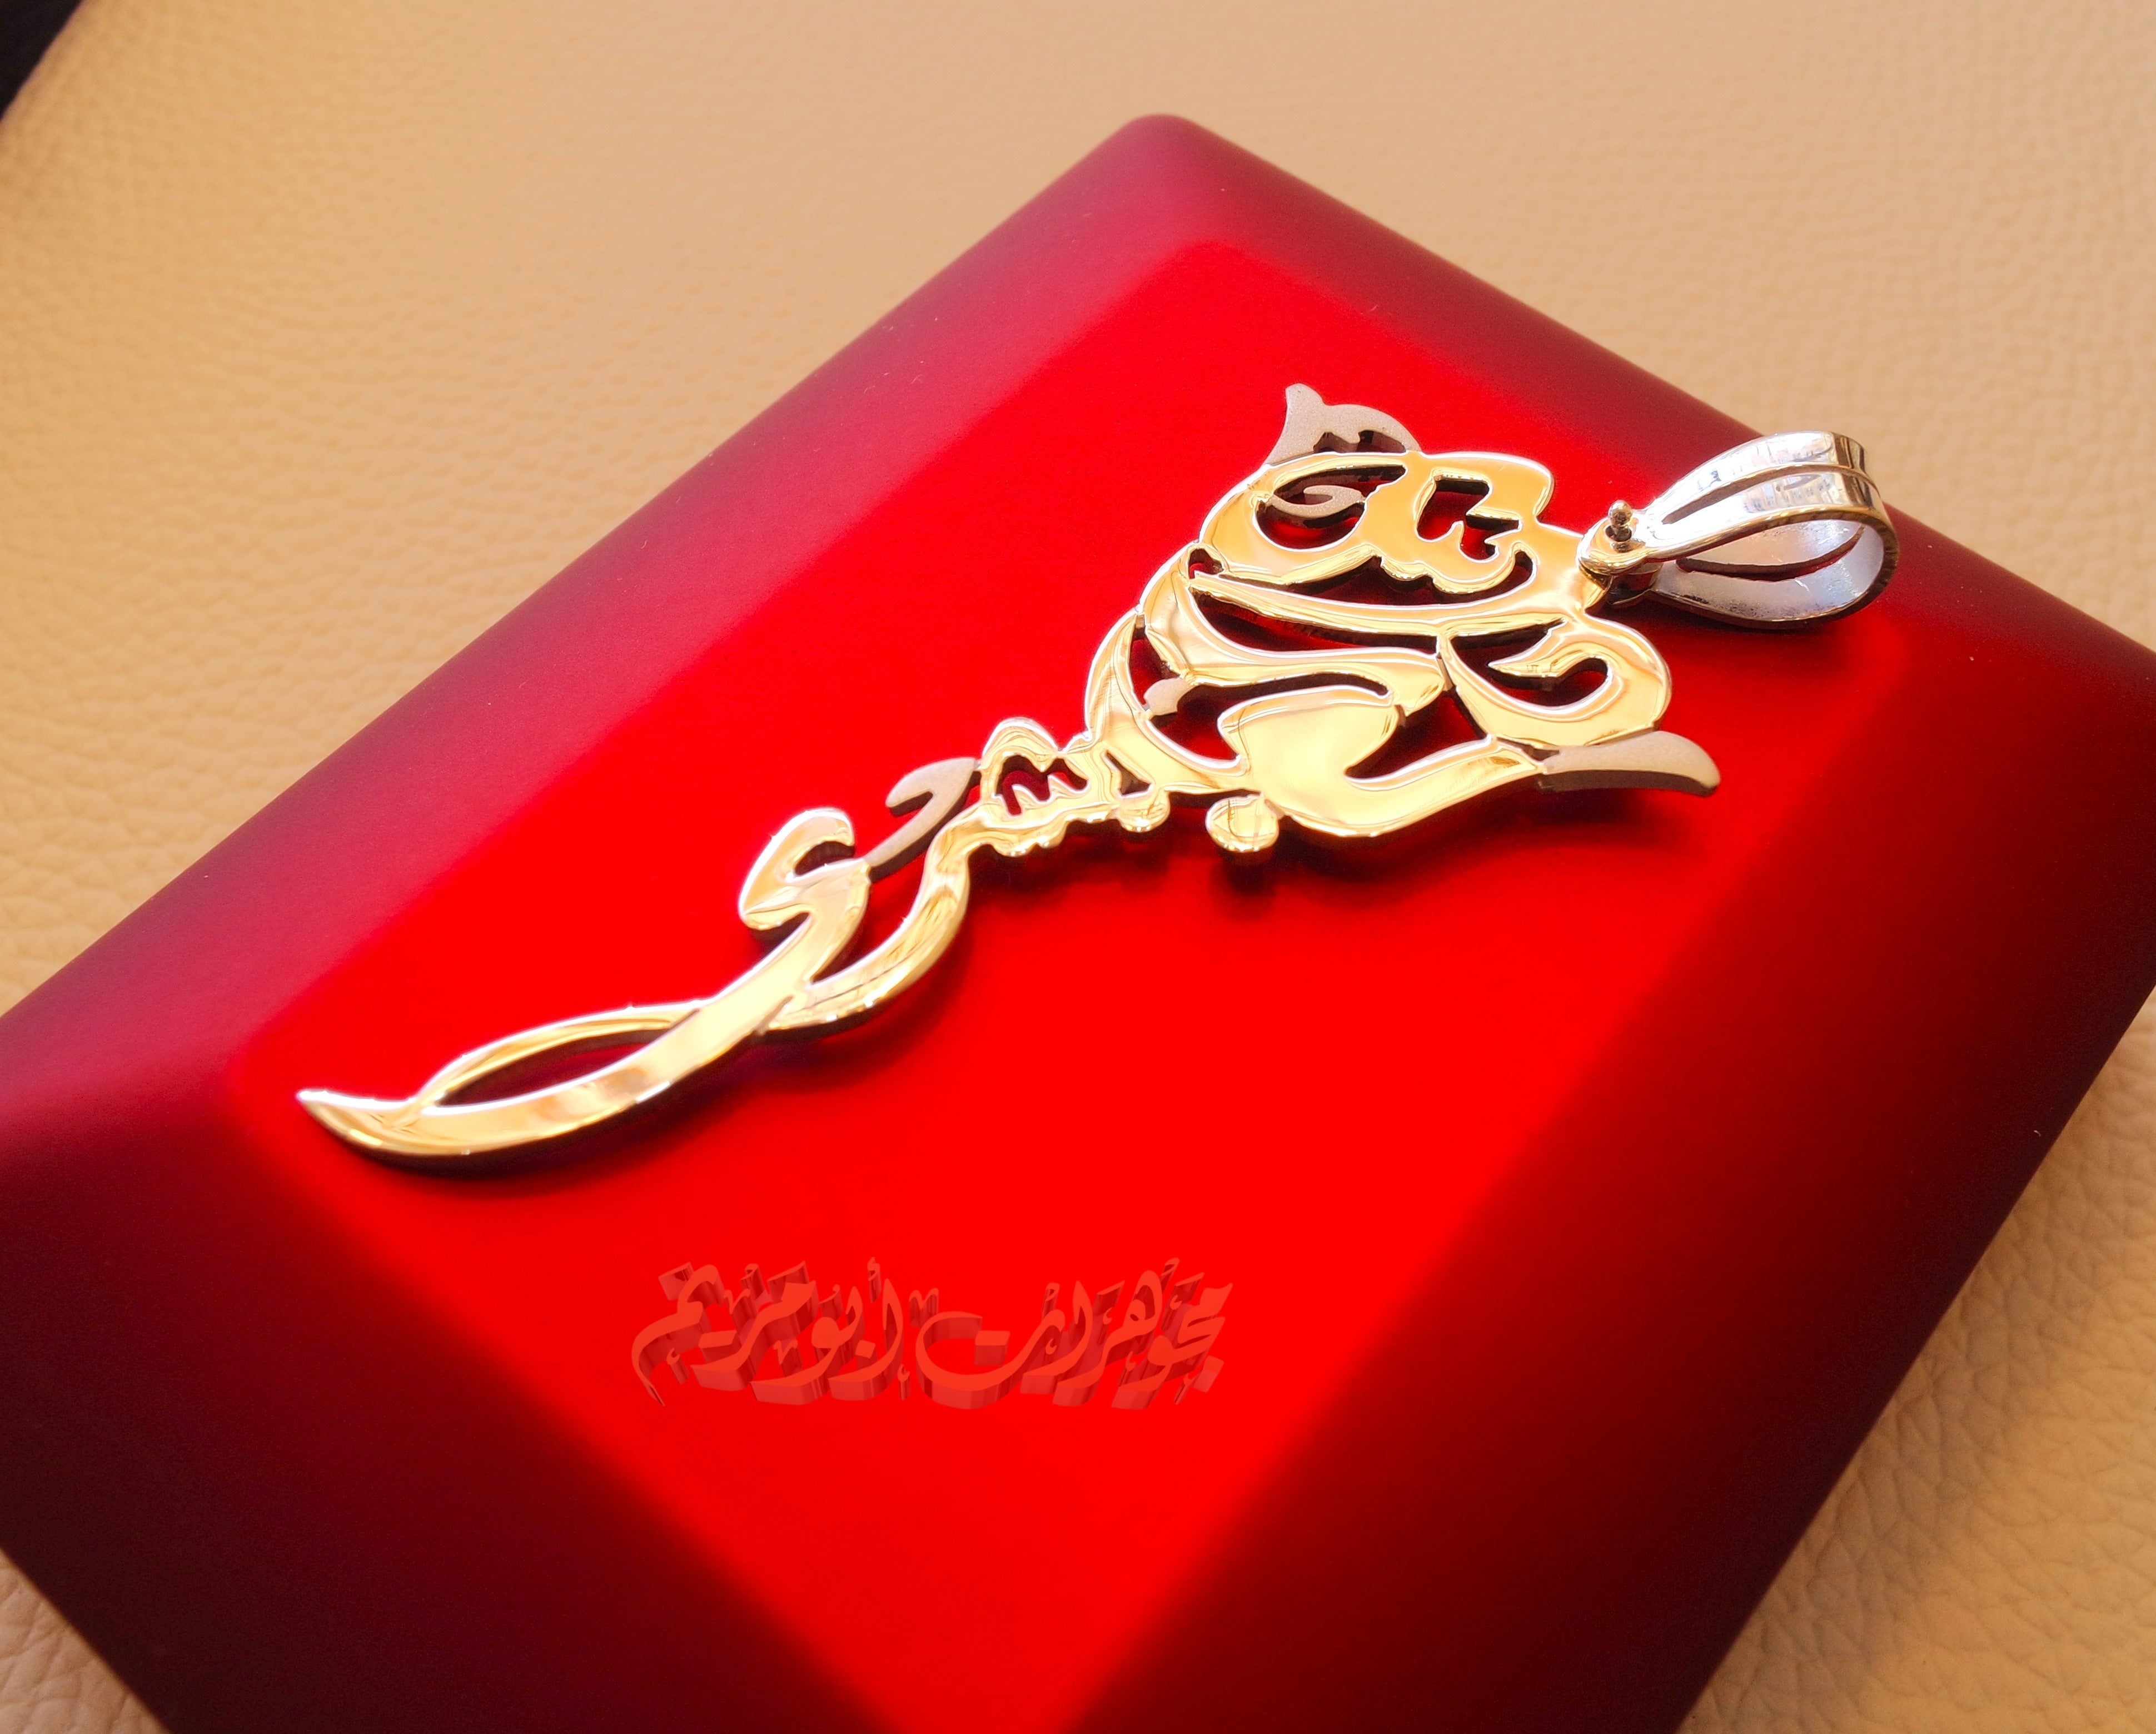 Rose flower Personalized pendant with thick chain 2 names Arabic customized silver 925 high quality polishing big size تعليقه اسماء عربي